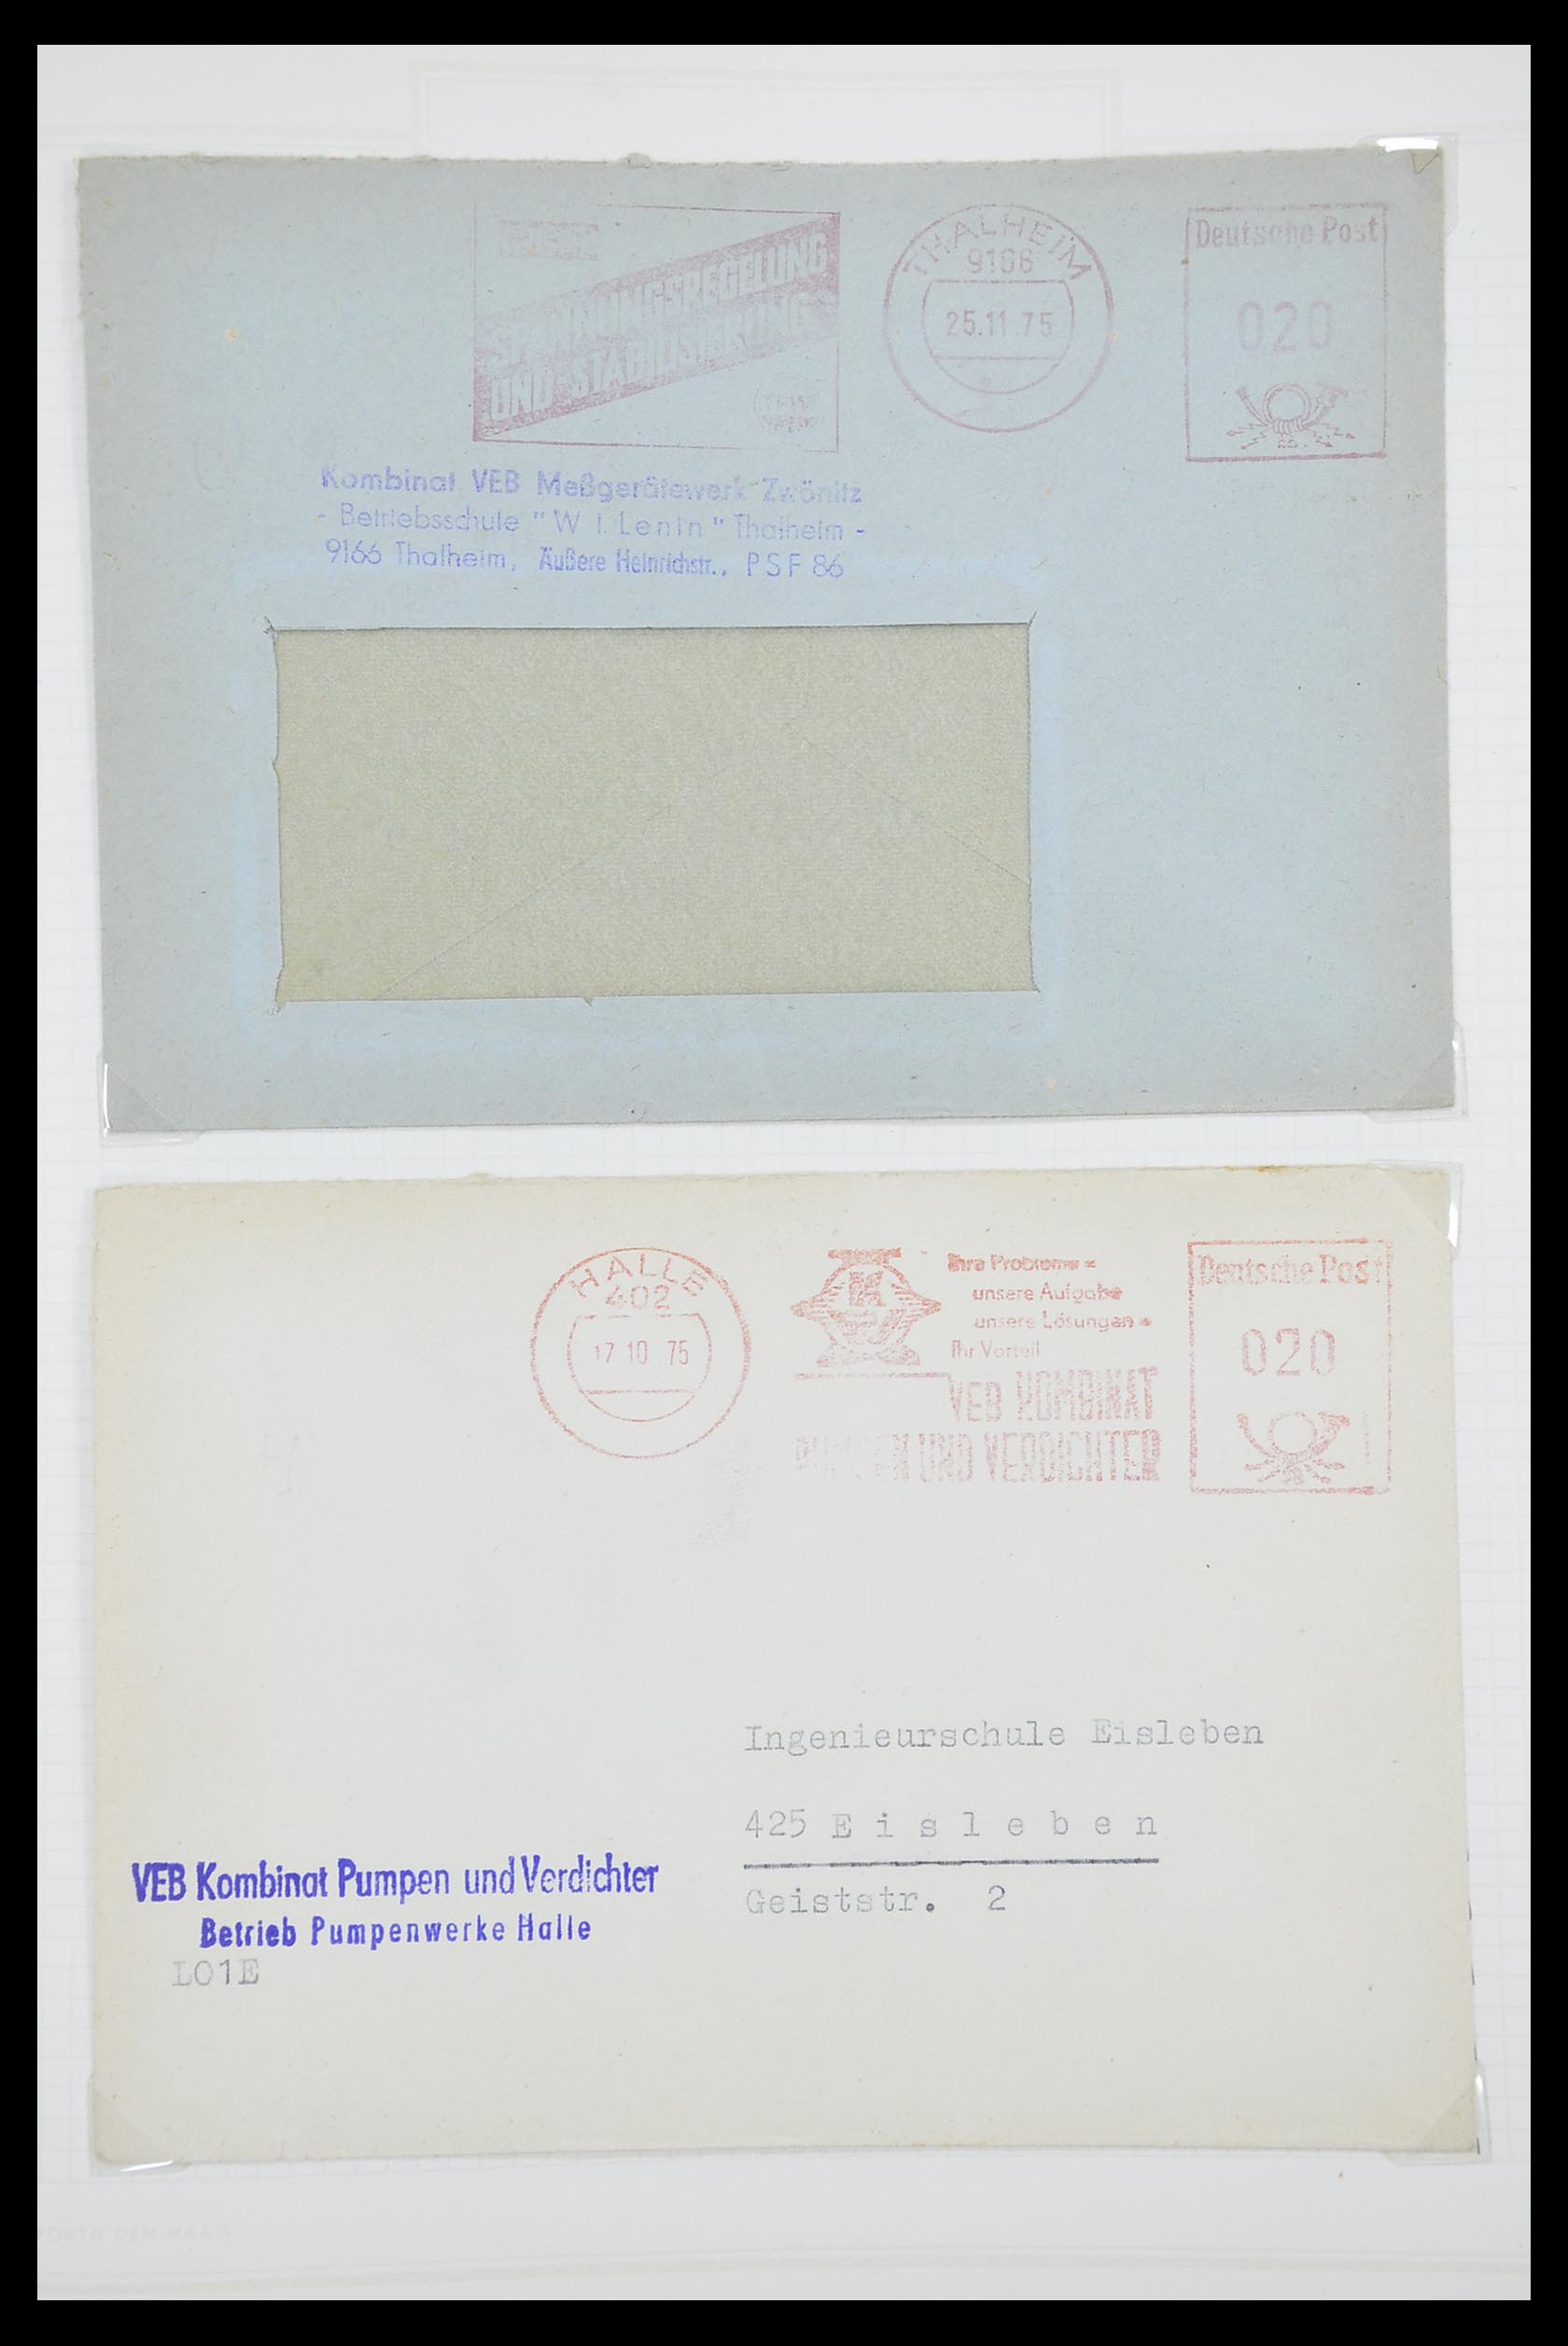 33883 048 - Stamp collection 33883 DDR service covers 1956-1986.